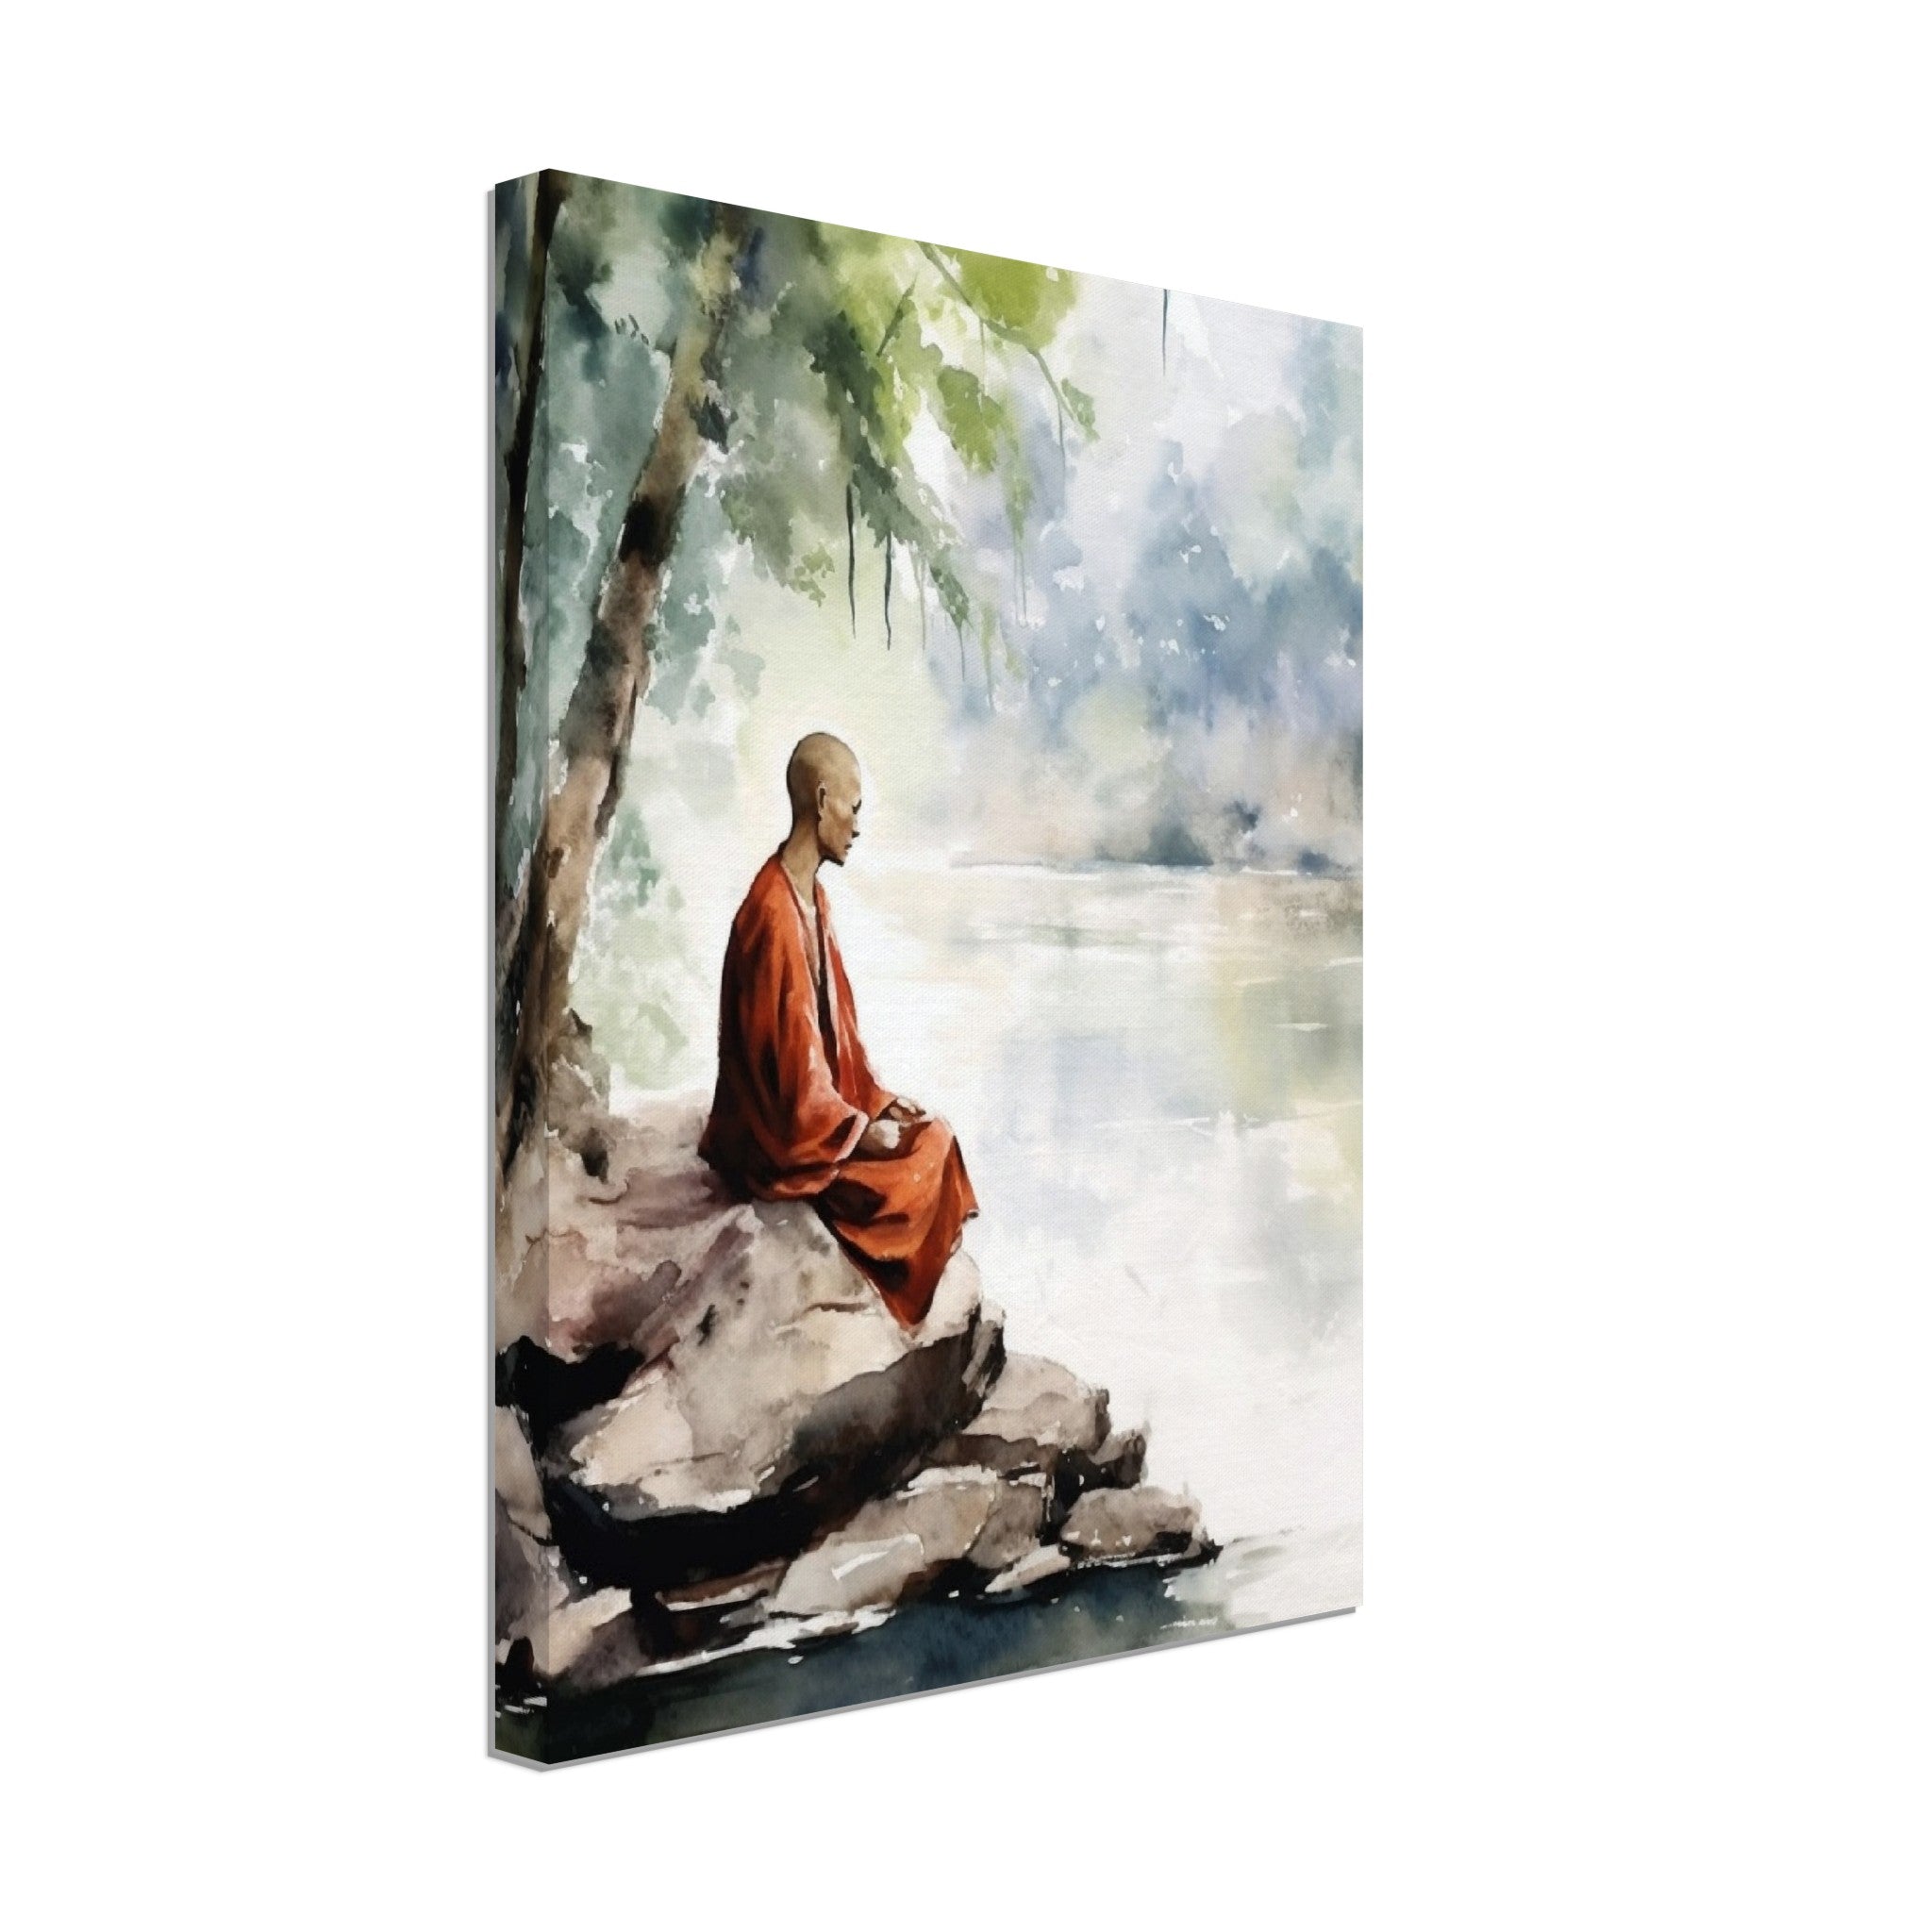 Water Colour Monk Meditating Under Trees Sitting On Rocks Near Water - immersiarts